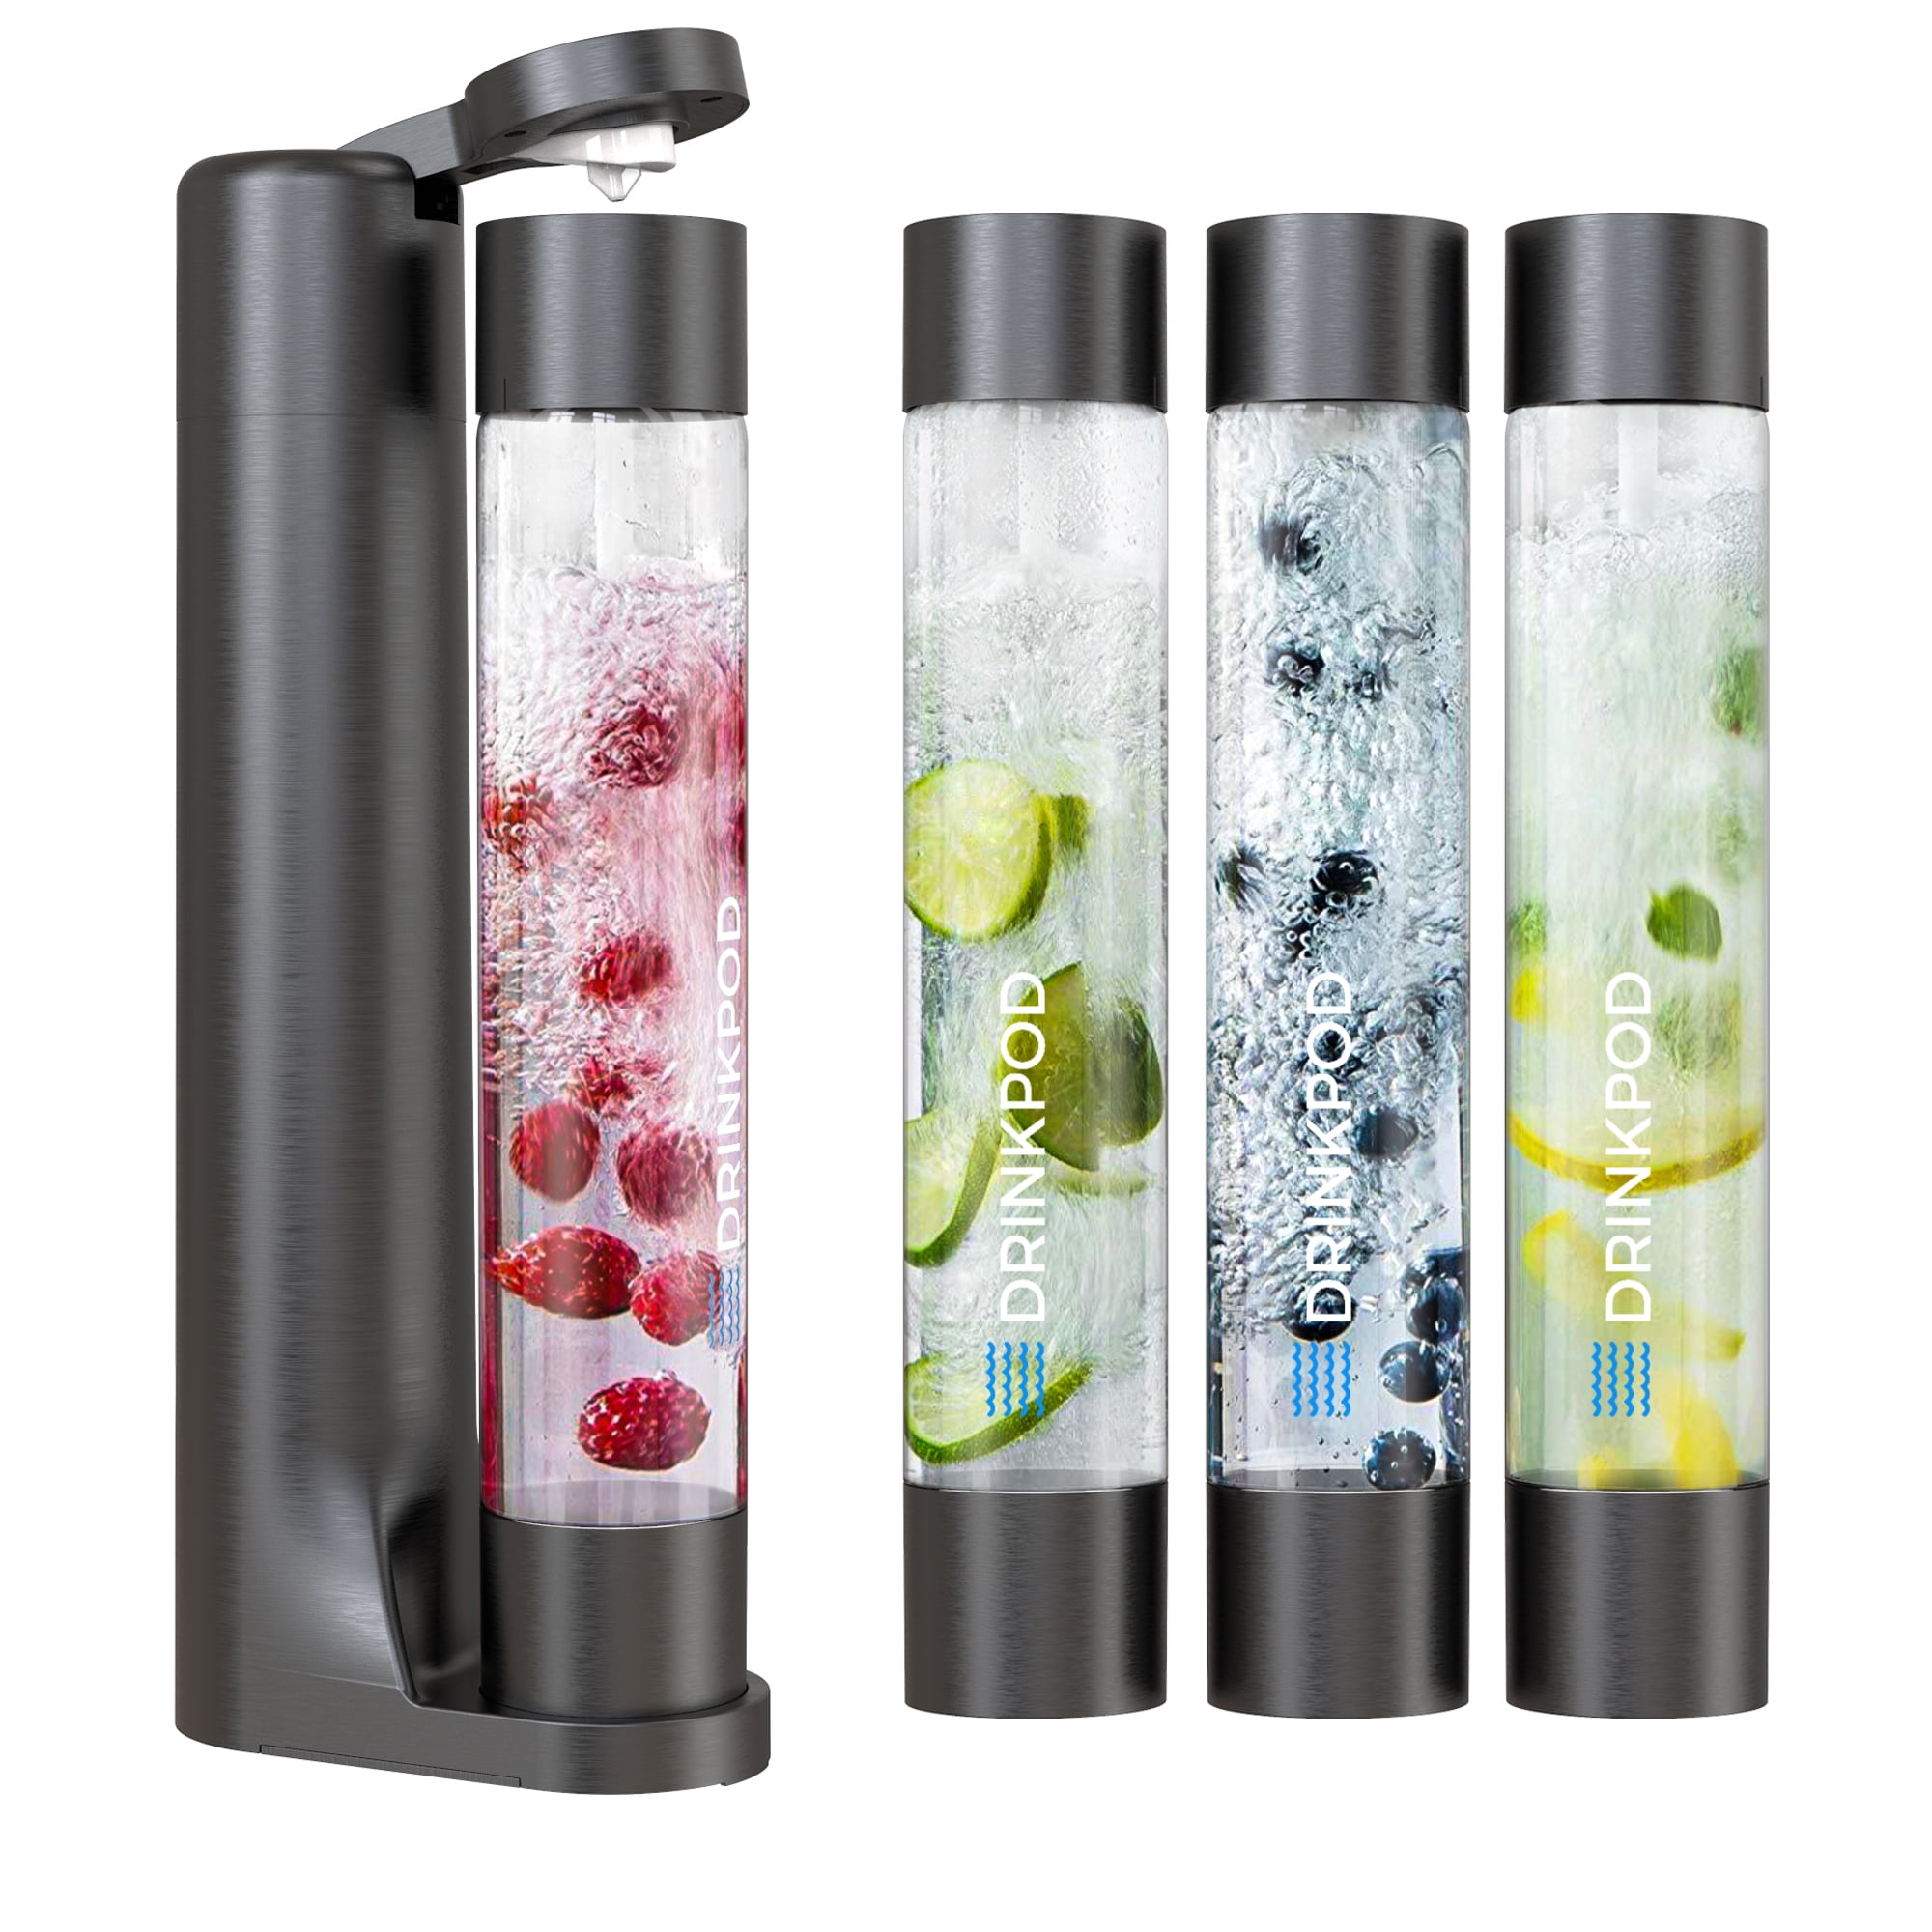 with 1 Litre Carbonator Bottle CO2 for Carbonated Water Cocktails and Other Drinks without CO2-Cylinder LEVIVO Water Carbonator Fruit & Fun Carbonator Slim Colour: Black 